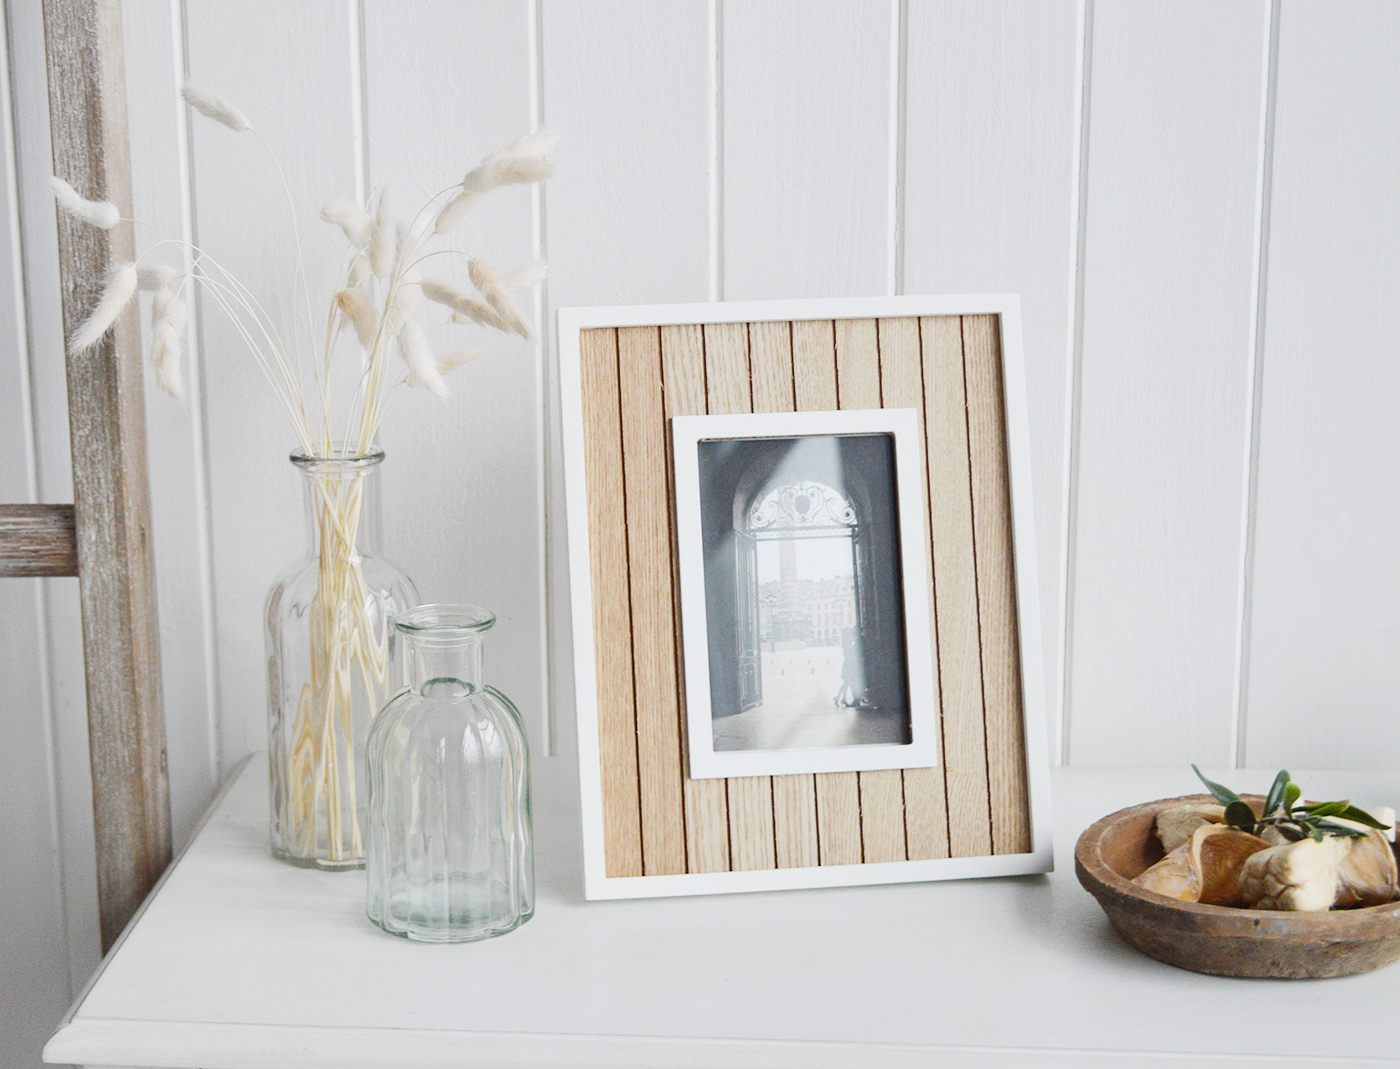 Weston Photo Frames - New England Coastal, Farmhouse, City and Country Furniture Homes and Interiors